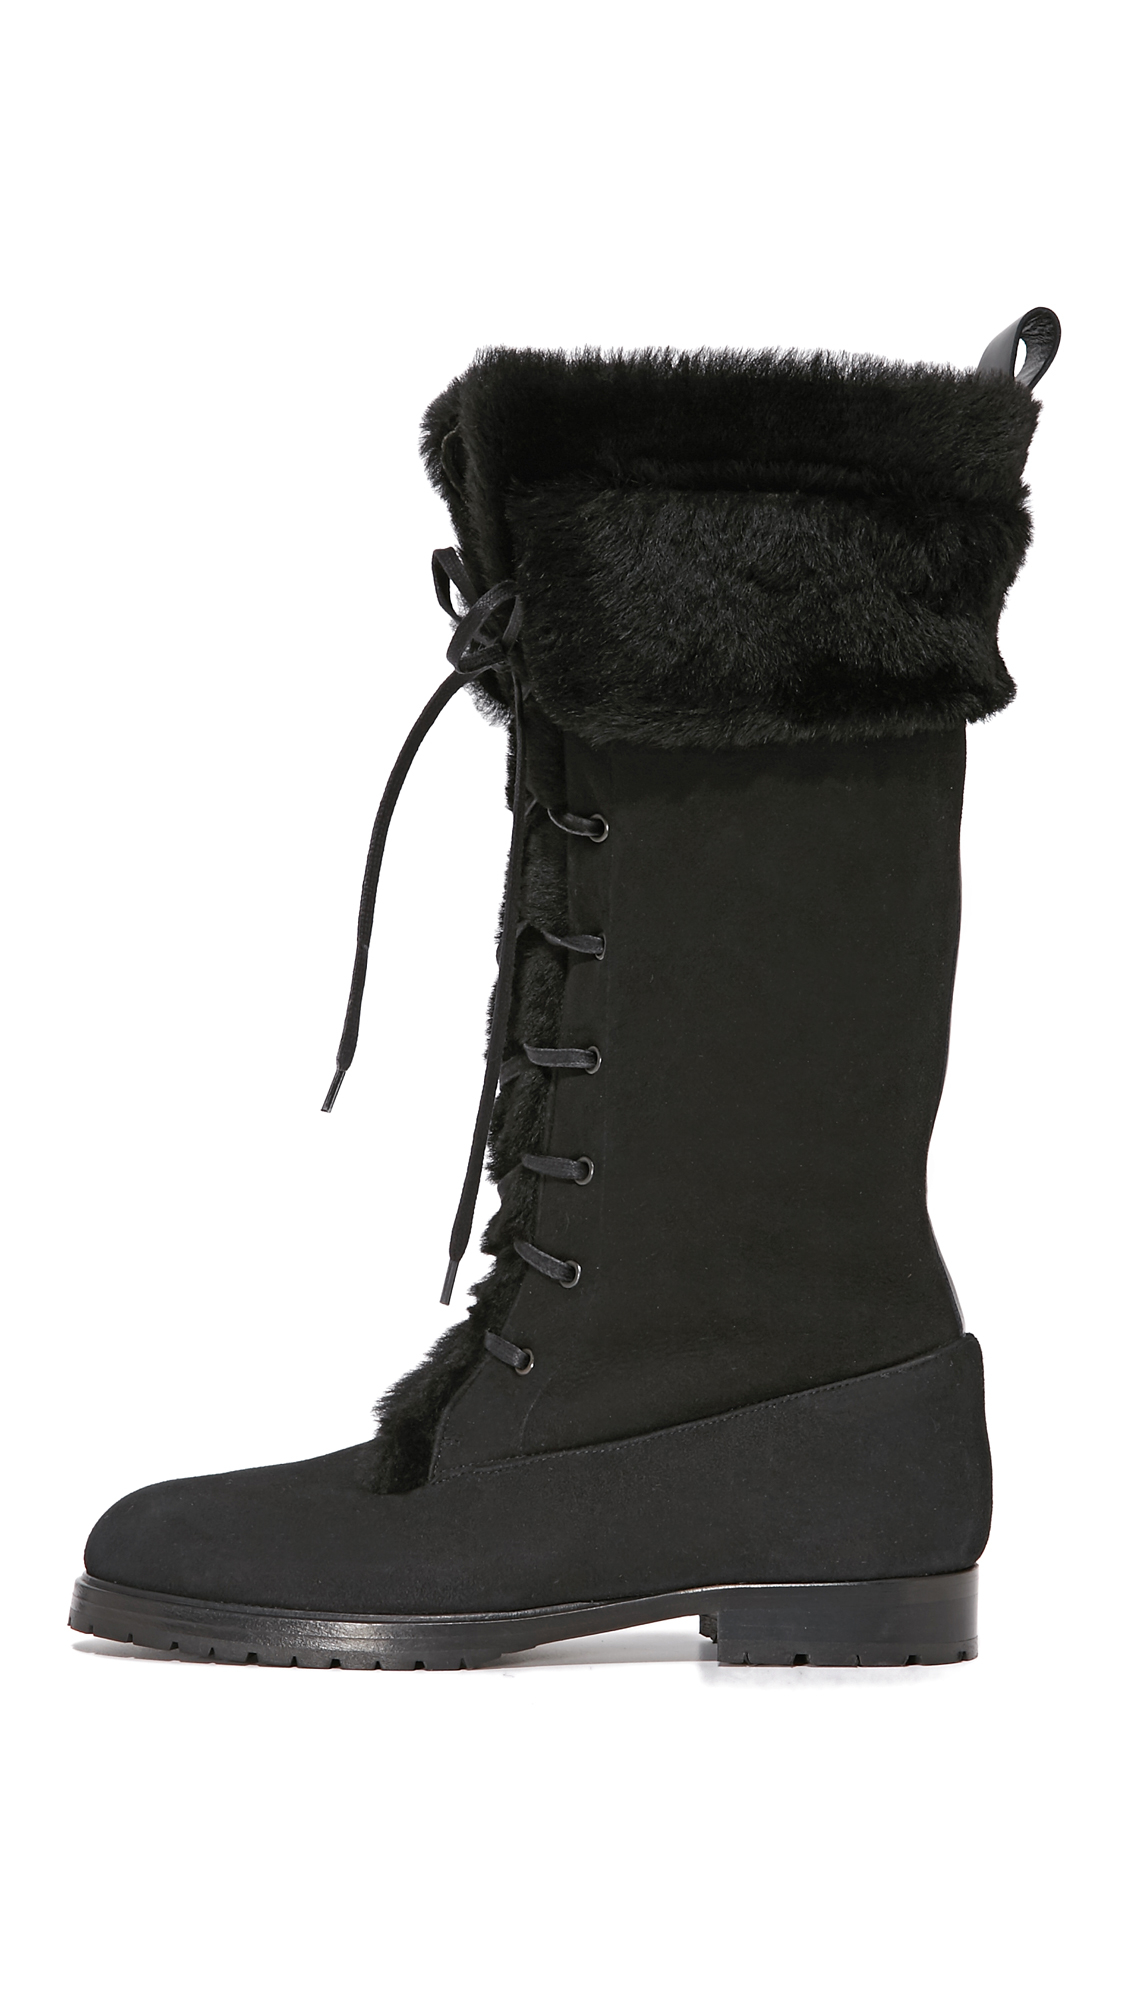 Sarah Flint Suede Cortina Boots in Black Lyst